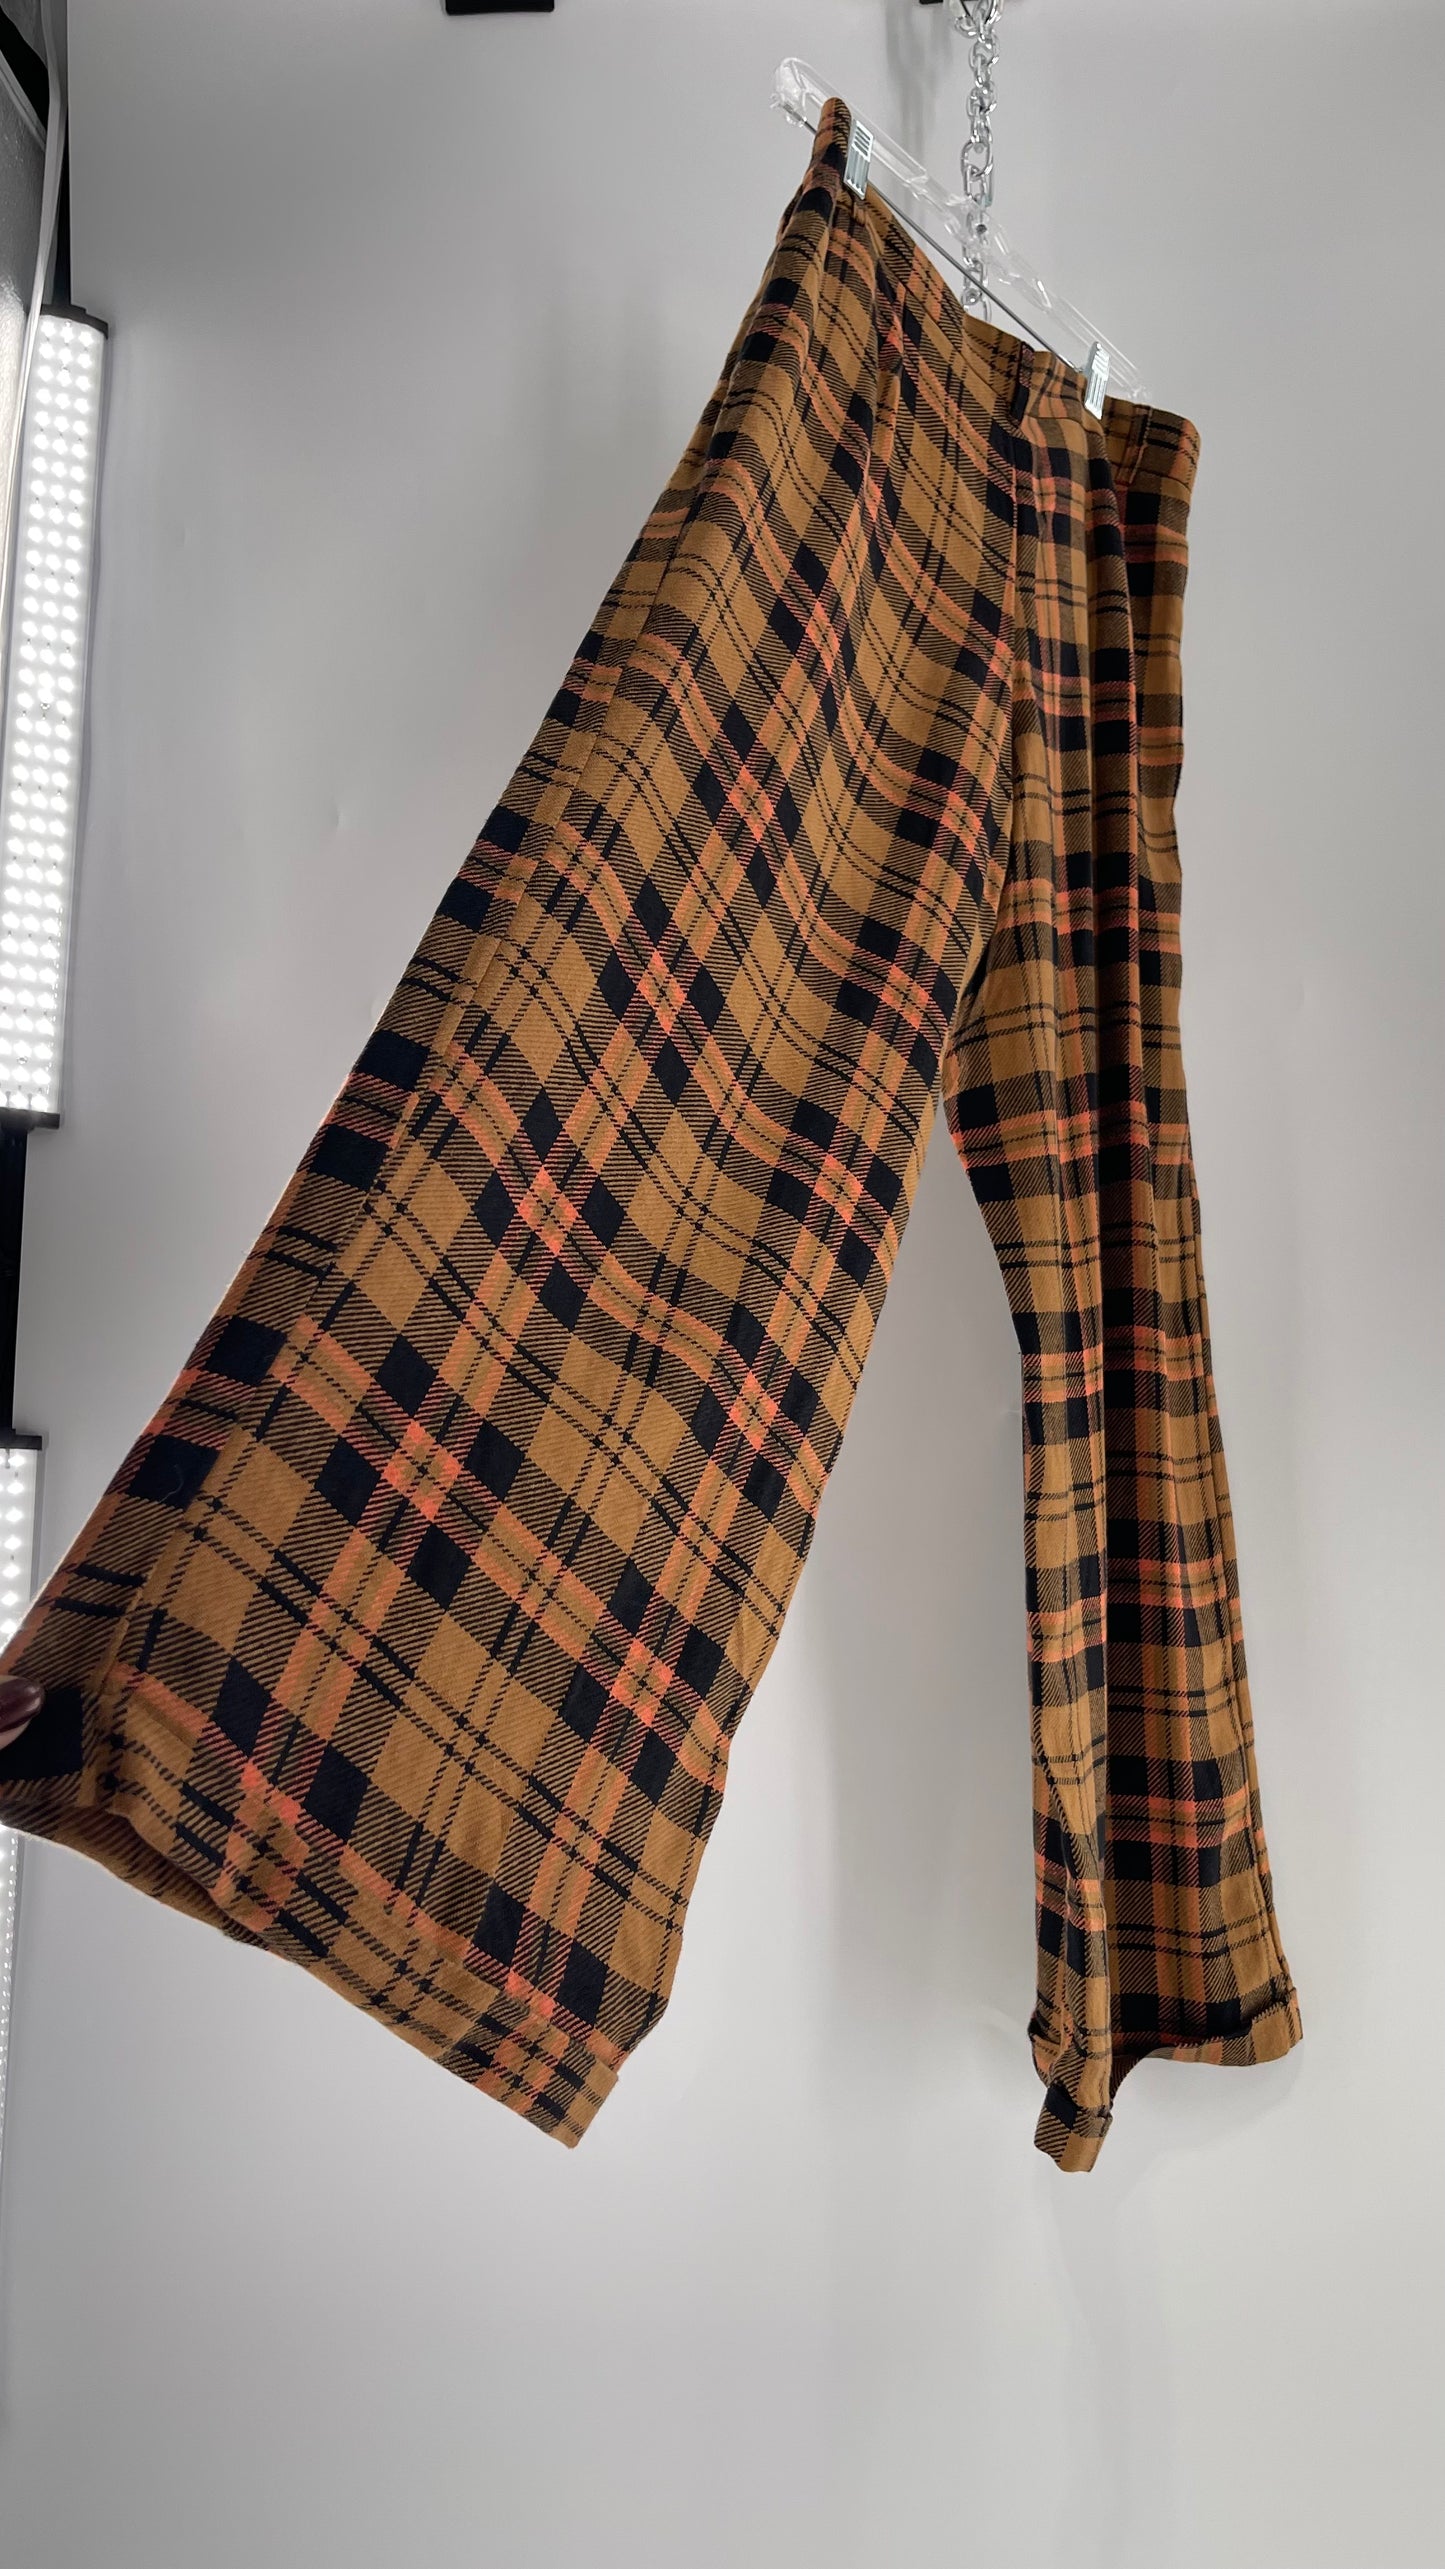 Free People Mustard,Salmon, Black Plaid High Waisted Wide Leg Trouser with Pleating (4)